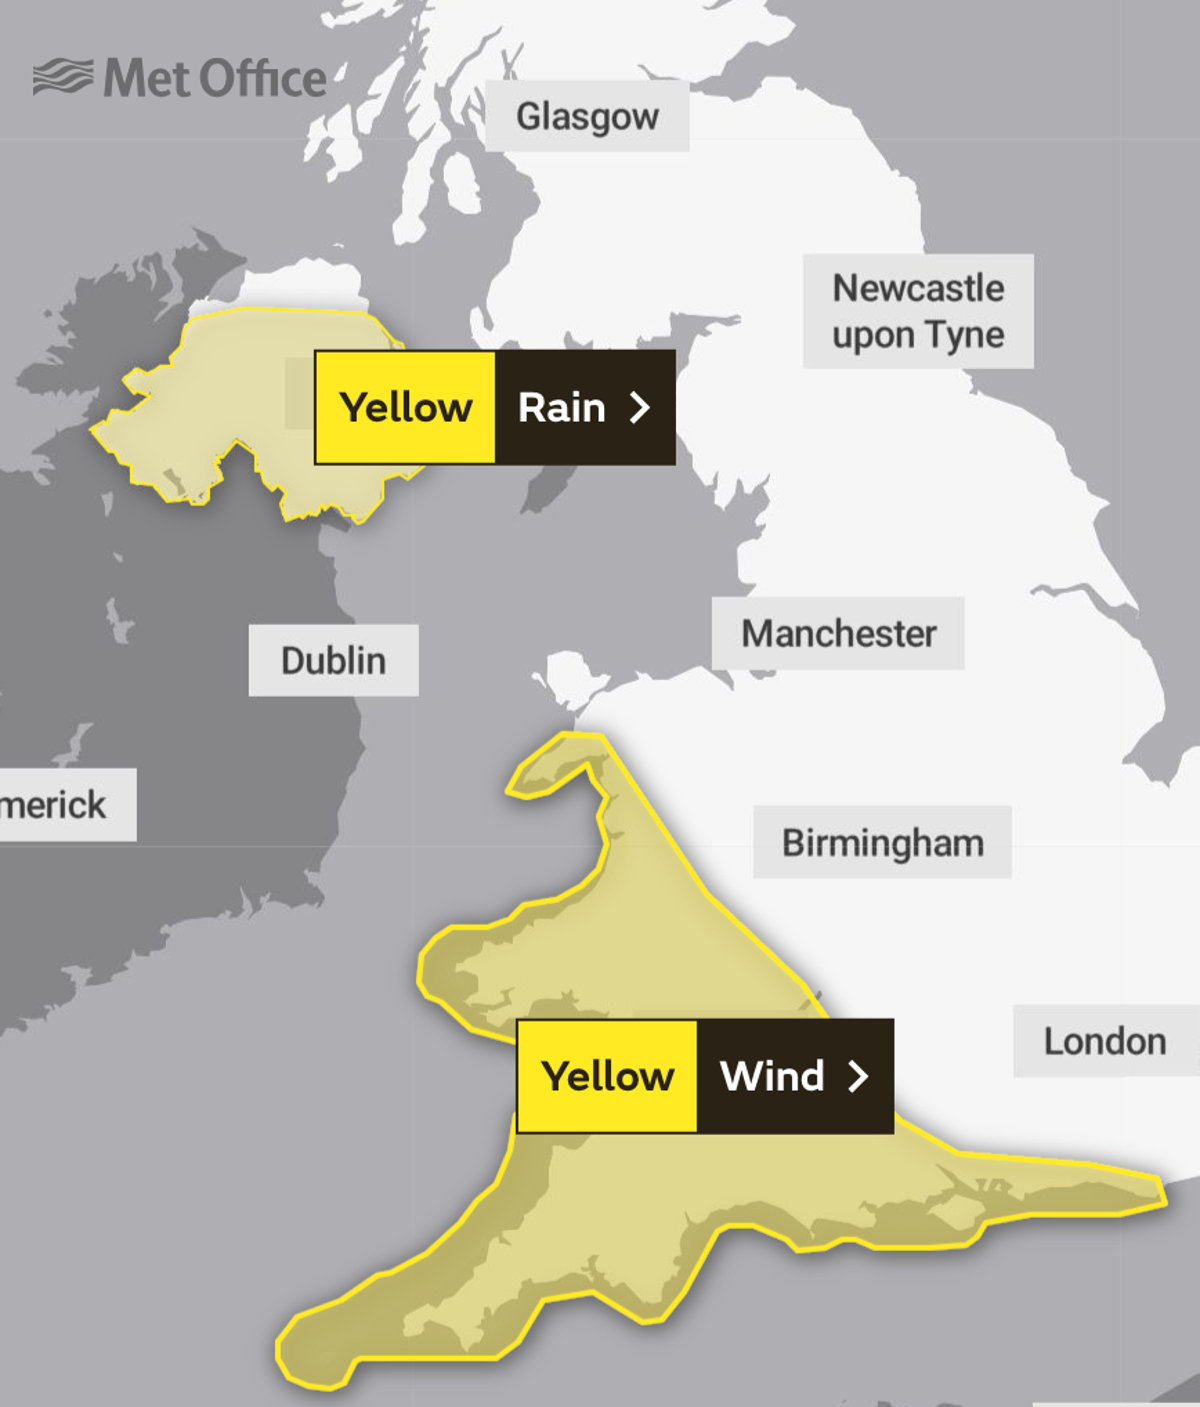 Two weather warnings are in force on Saturday as Storm Antoni is set to hit (Met Office)